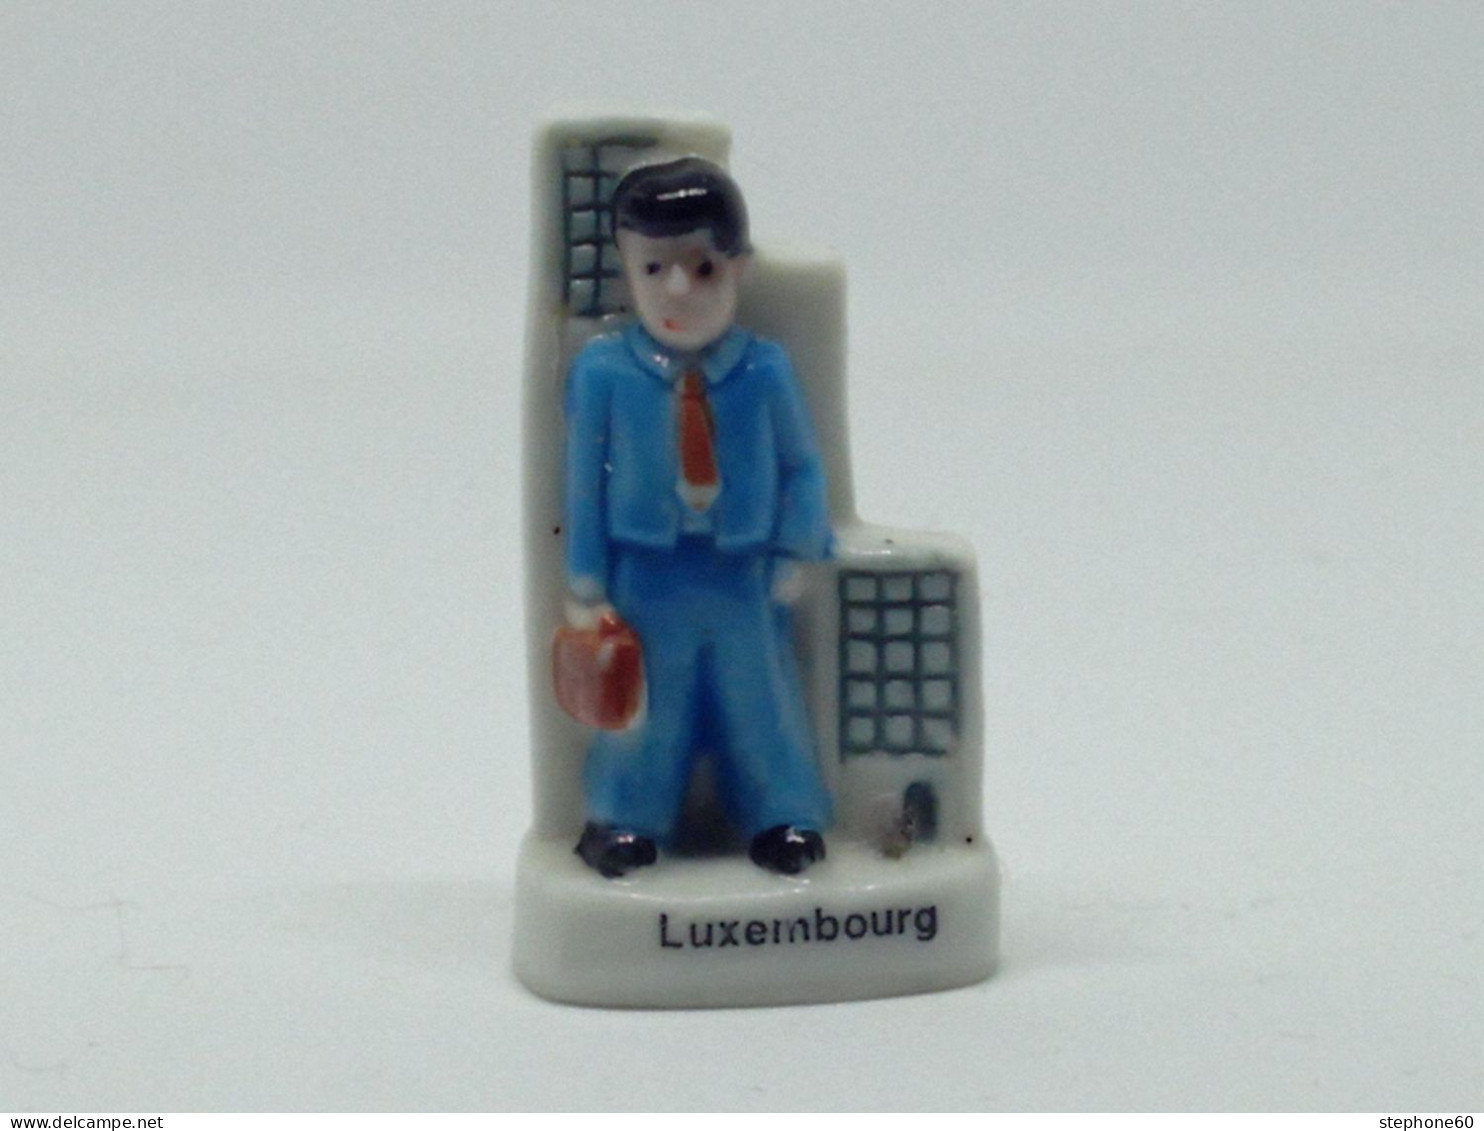 A002 - (21) Feve Pays Luxembourg Personnage - Countries